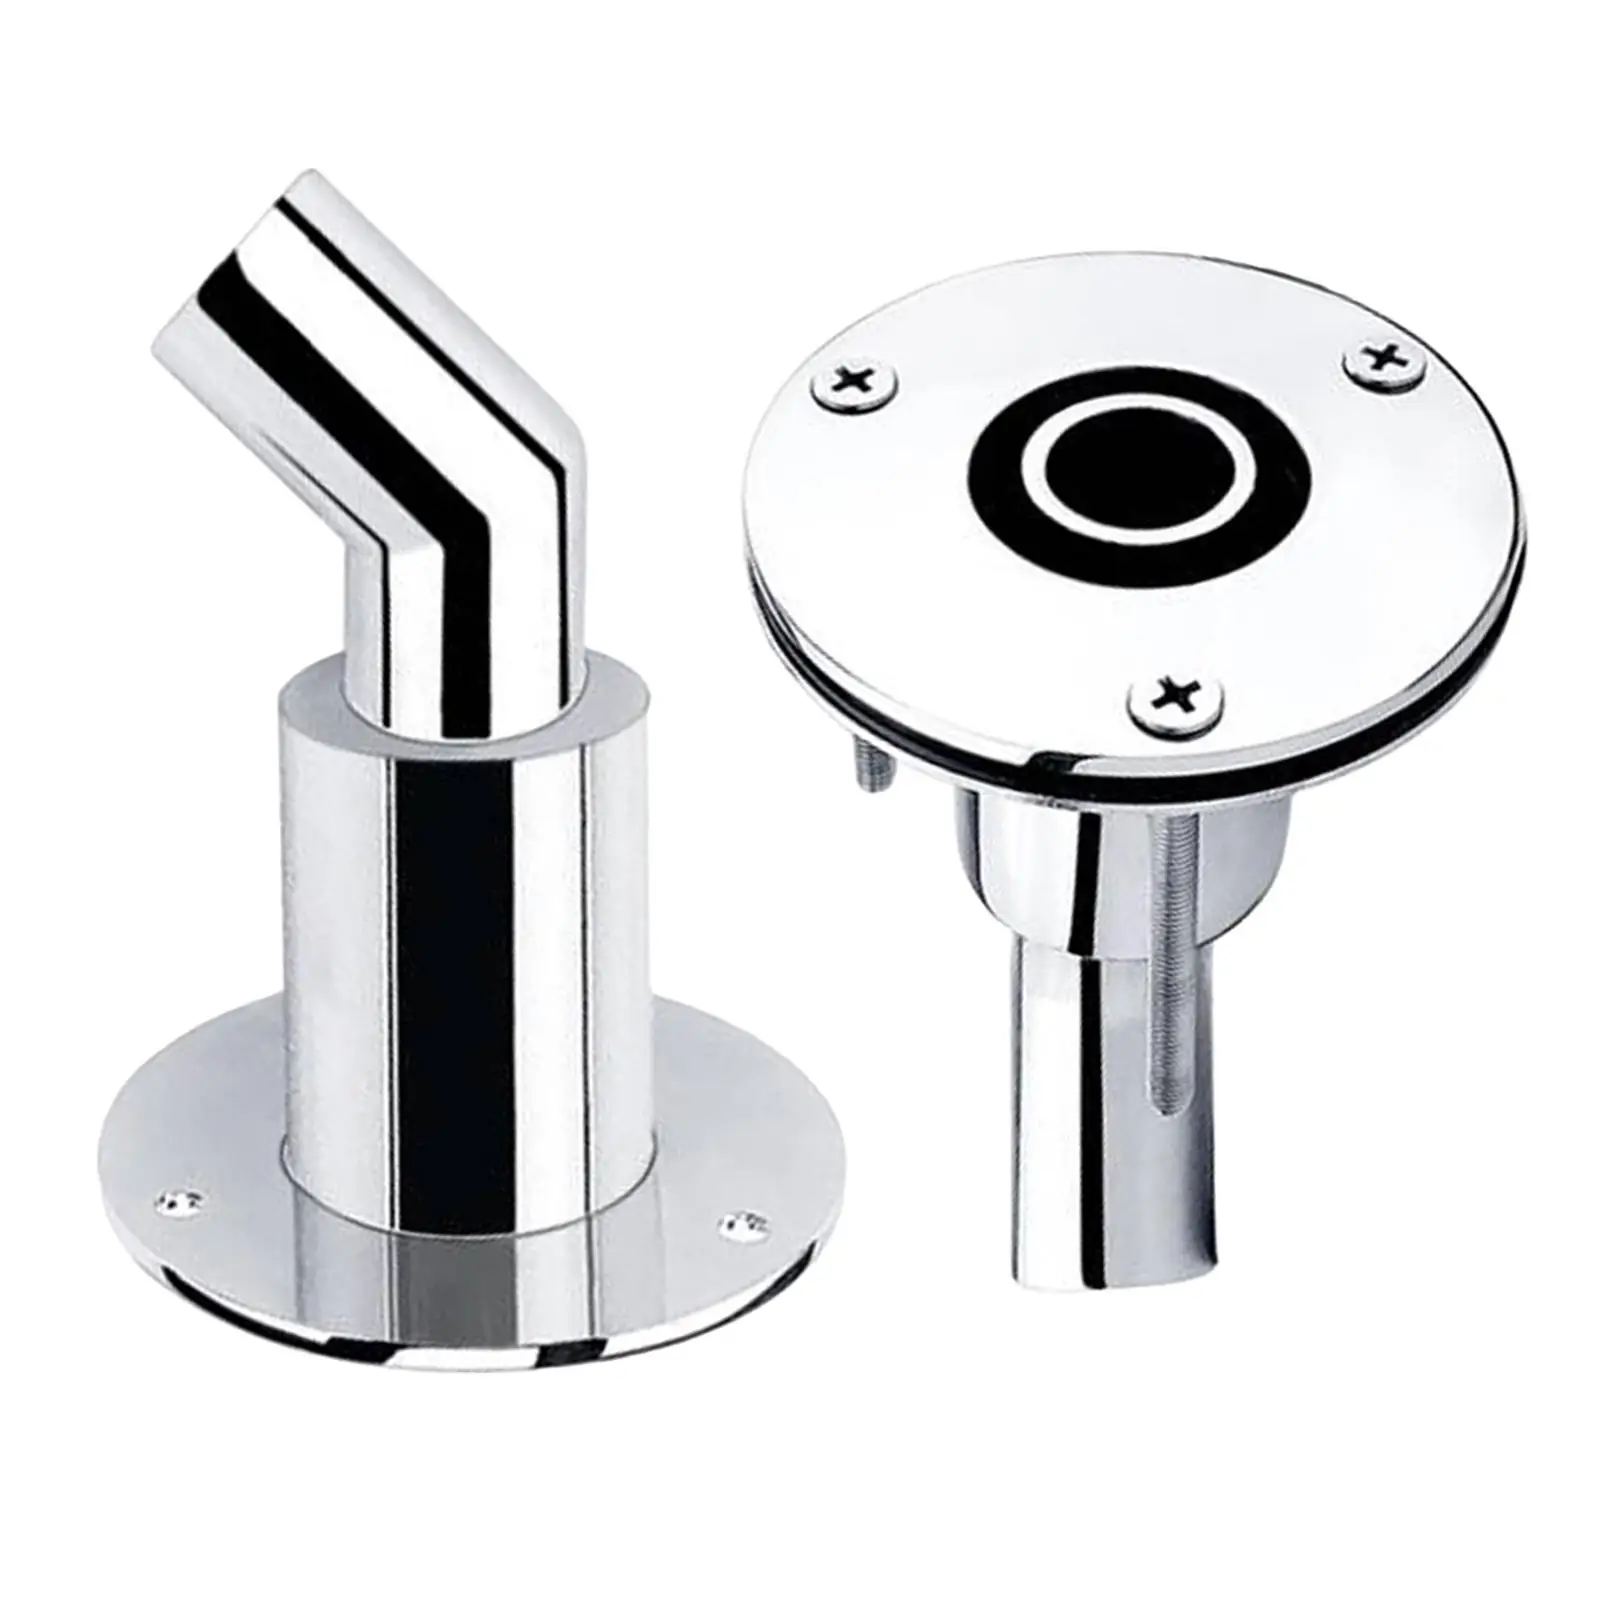 Stainless Steel Boat Through Hull  Tube Socket Material Plumbing Fitting, Corrosion Resistance